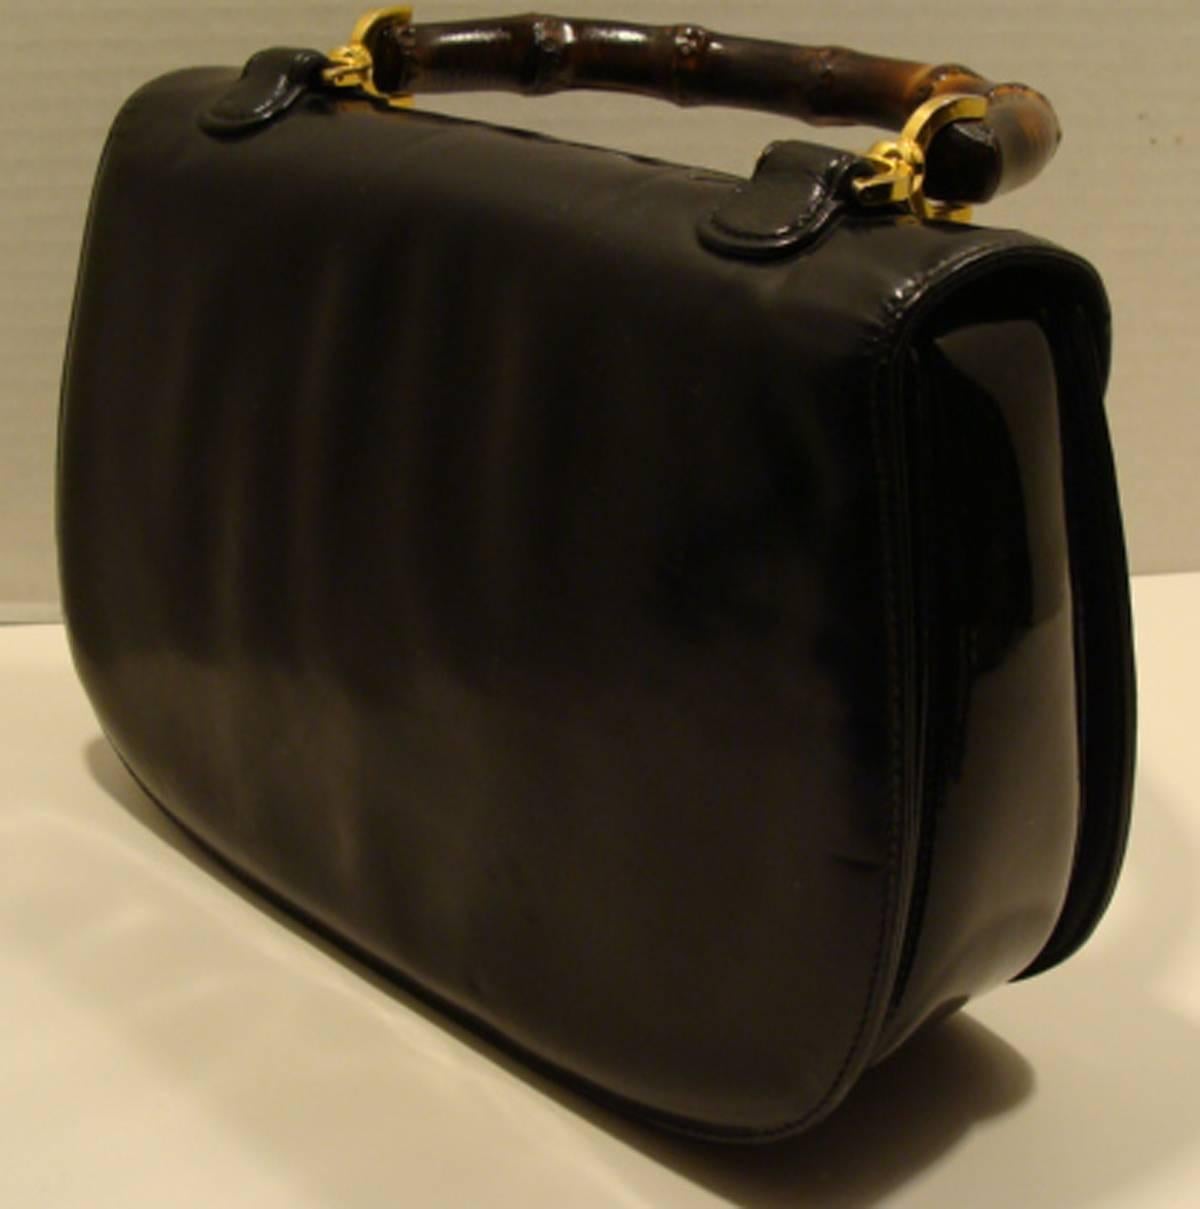 This is one of our favorite classic vintage bags by Gucci.  This particular bag is an unusual example.  It is made of two types of leather.  
The exterior front, top and back is made of a very fine black leather and the gusset/side panels and